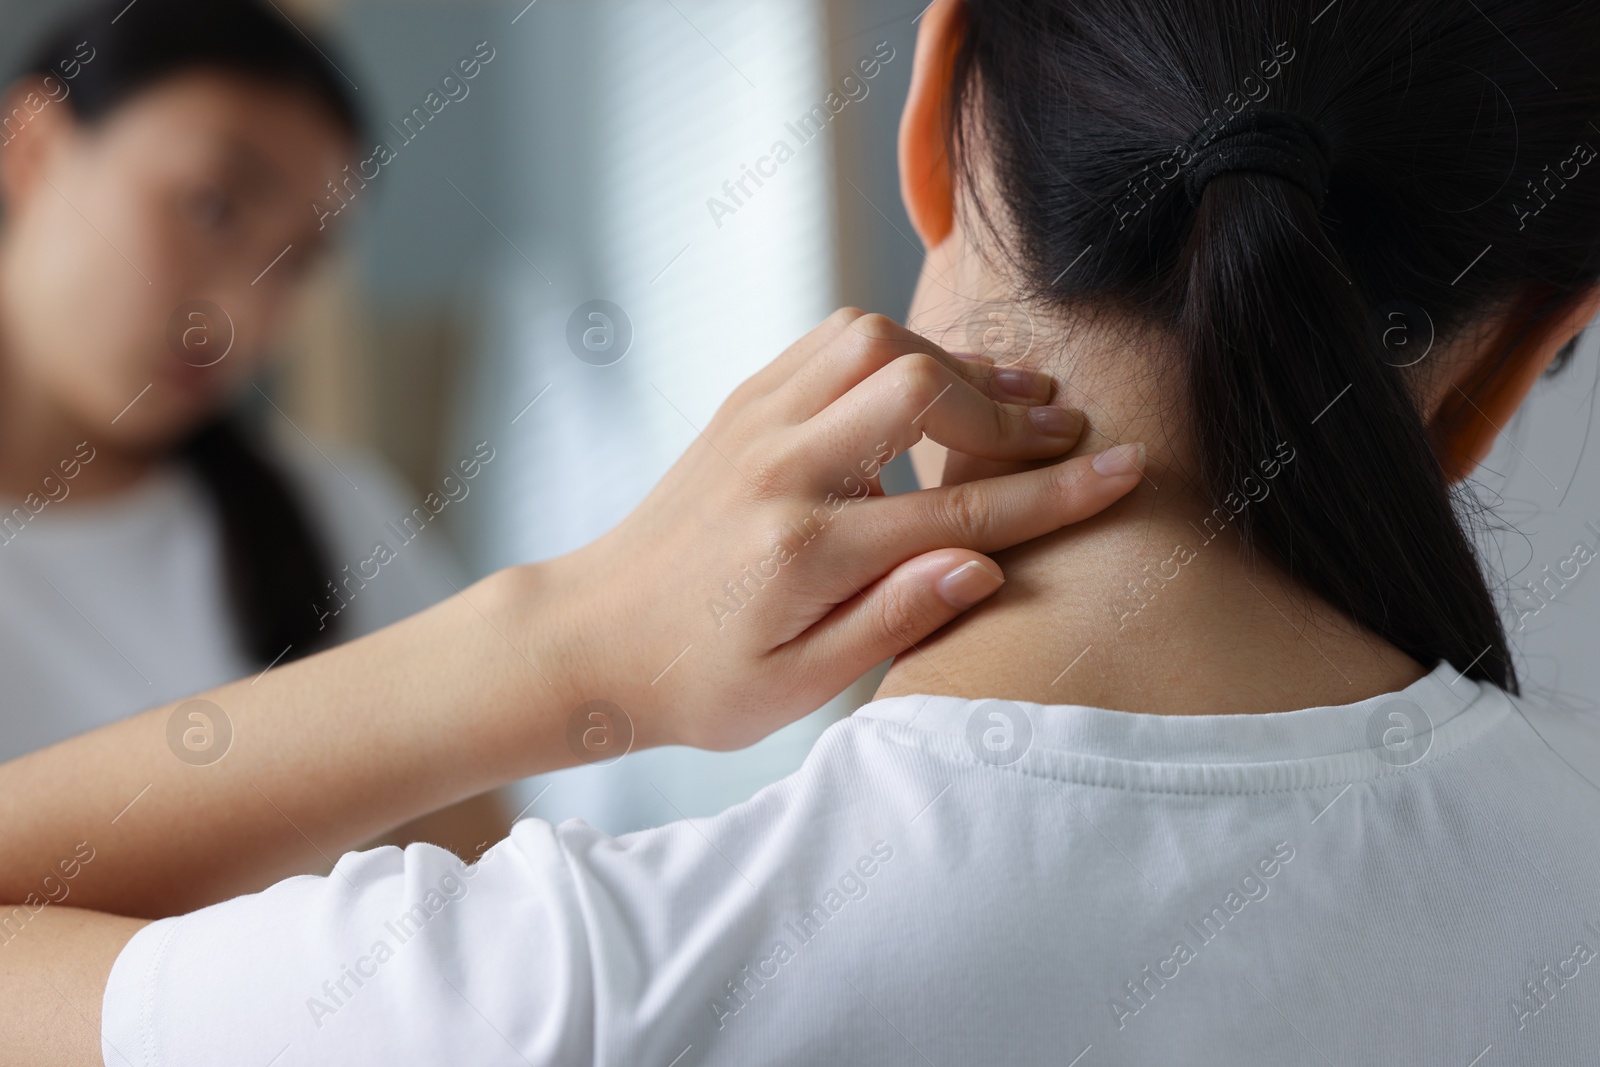 Photo of Suffering from allergy. Young woman scratching her neck near mirror indoors, back view